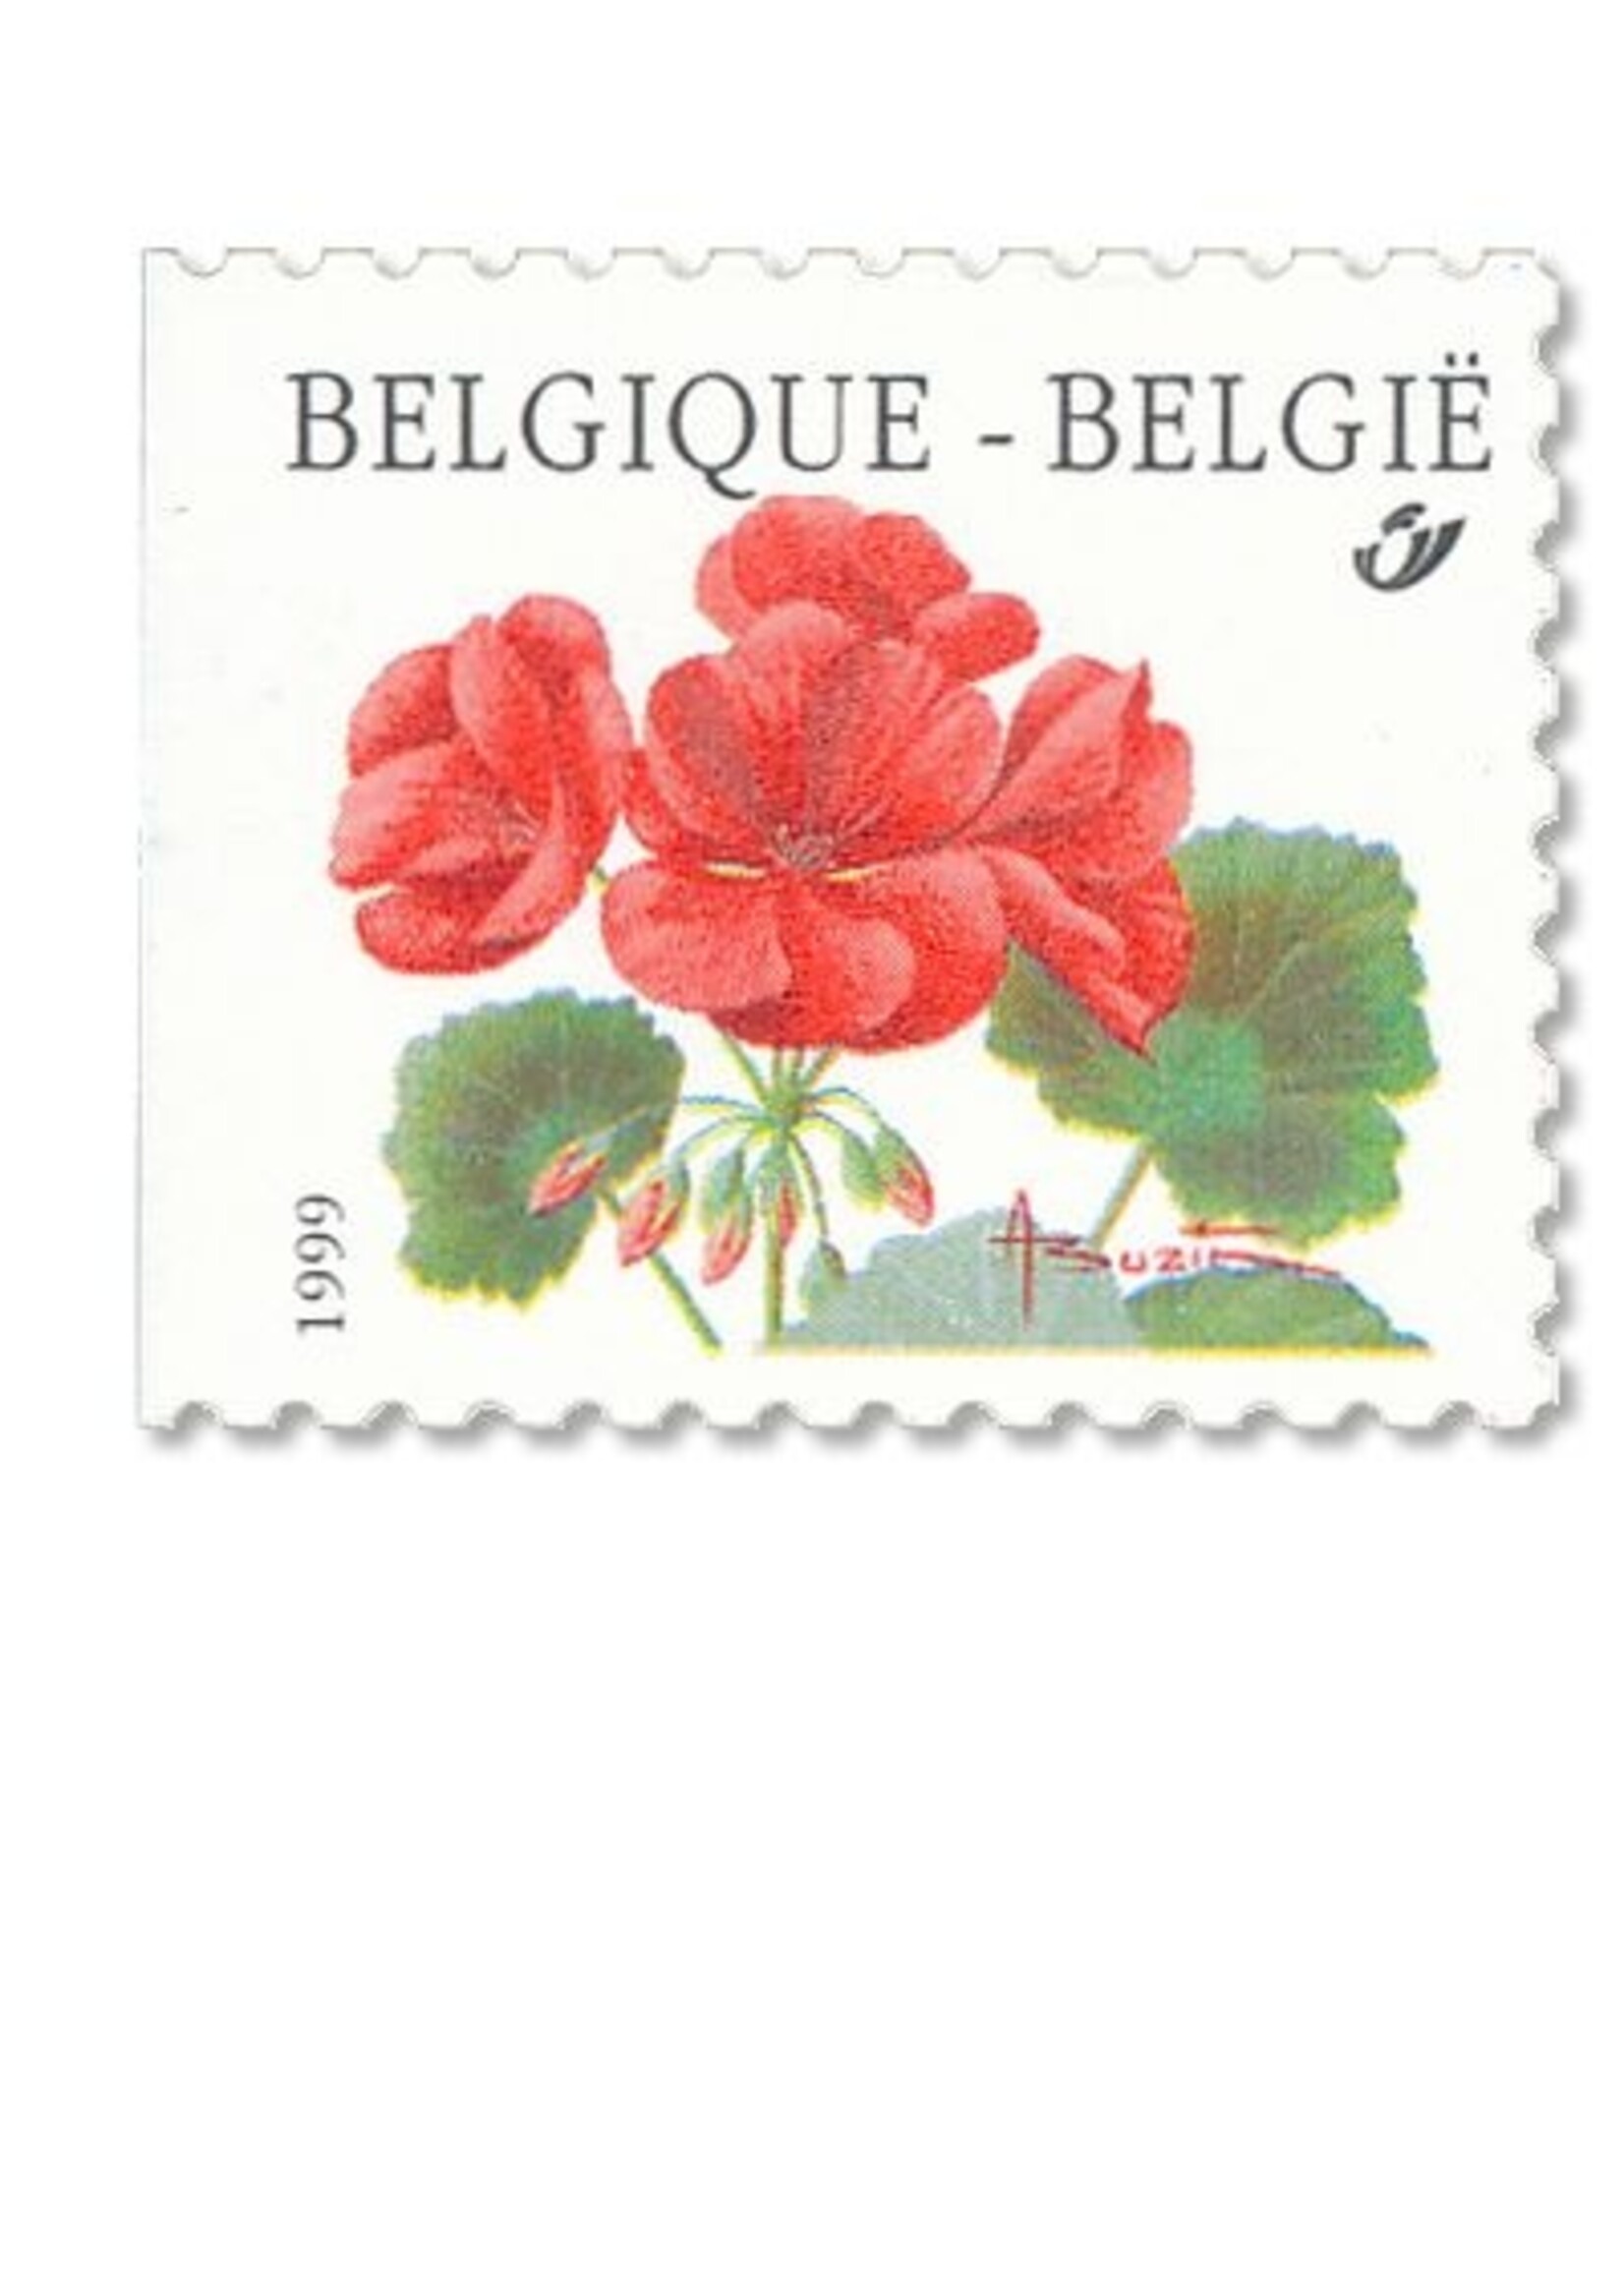 Theme Nature 2 - Booklet with 10 self-adhesive stamps - Rate 1, Belgium